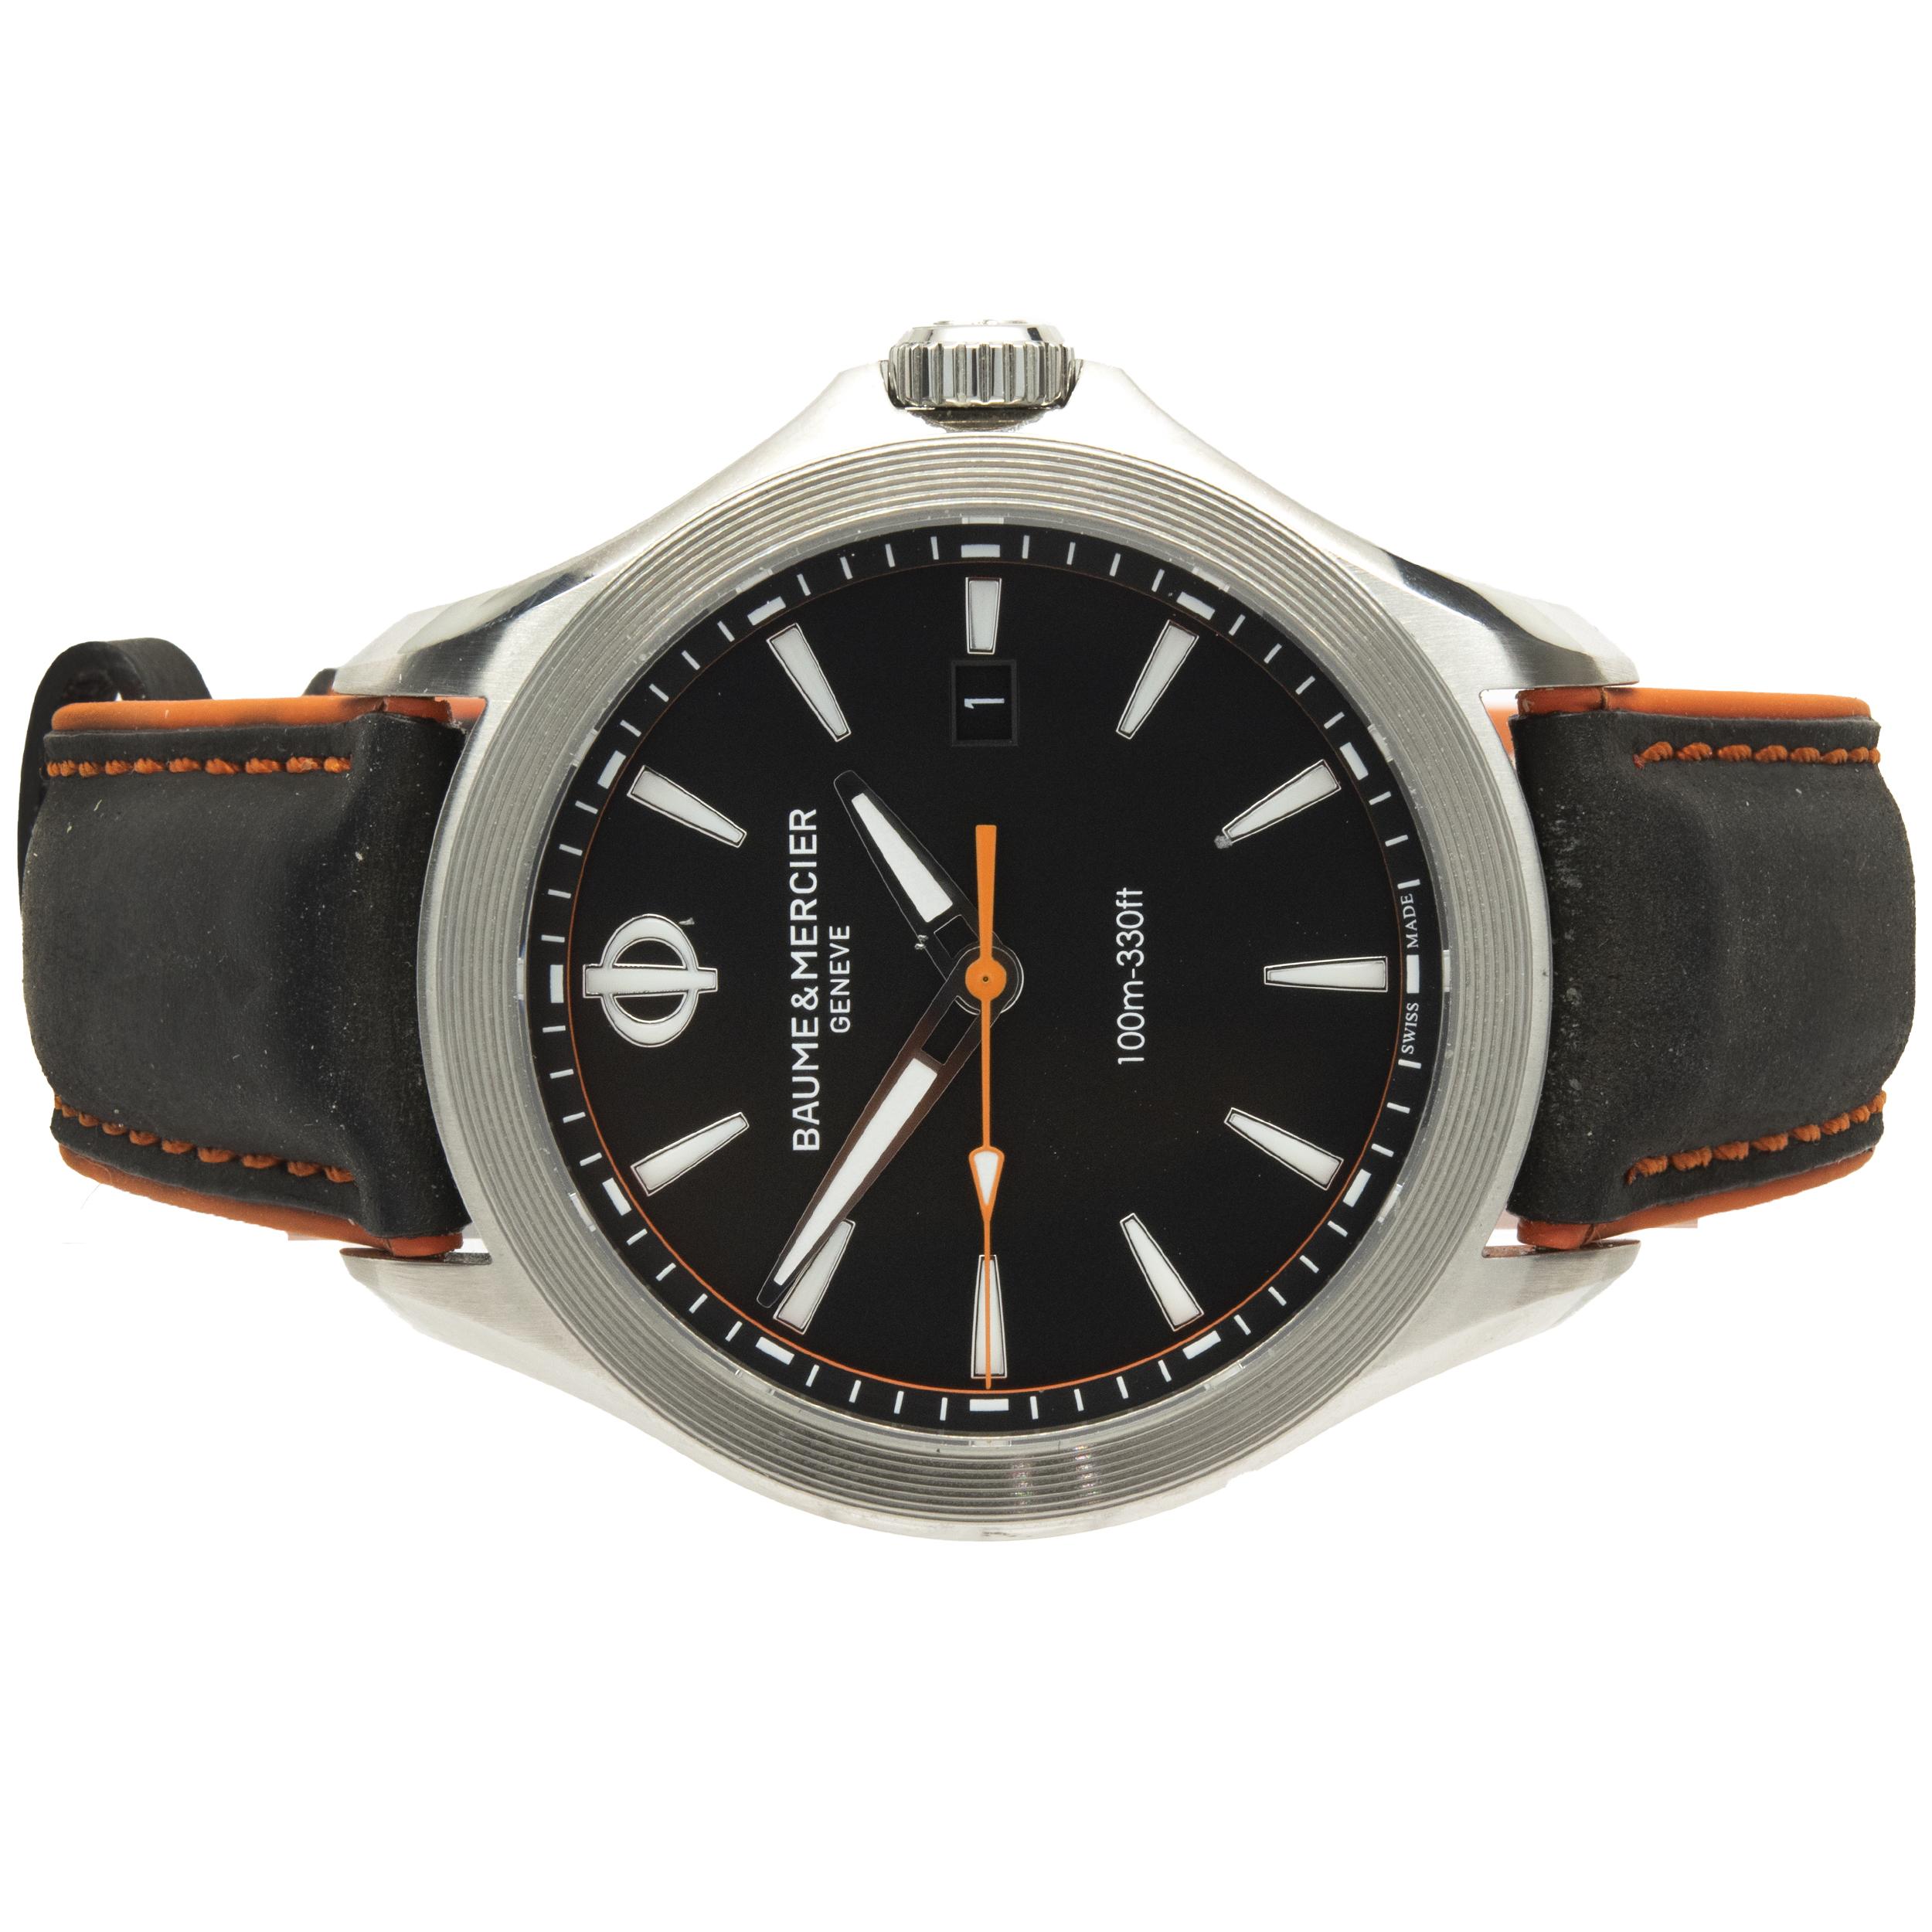 Movement: quartz
Function: hours, minutes, seconds, date
Case: 42mm stainless steel round case, smooth bezel
Band: black and orange strap with buckle 
Dial: black stick
Serial # 6030XXX
Reference # 10411


Complete with original box and